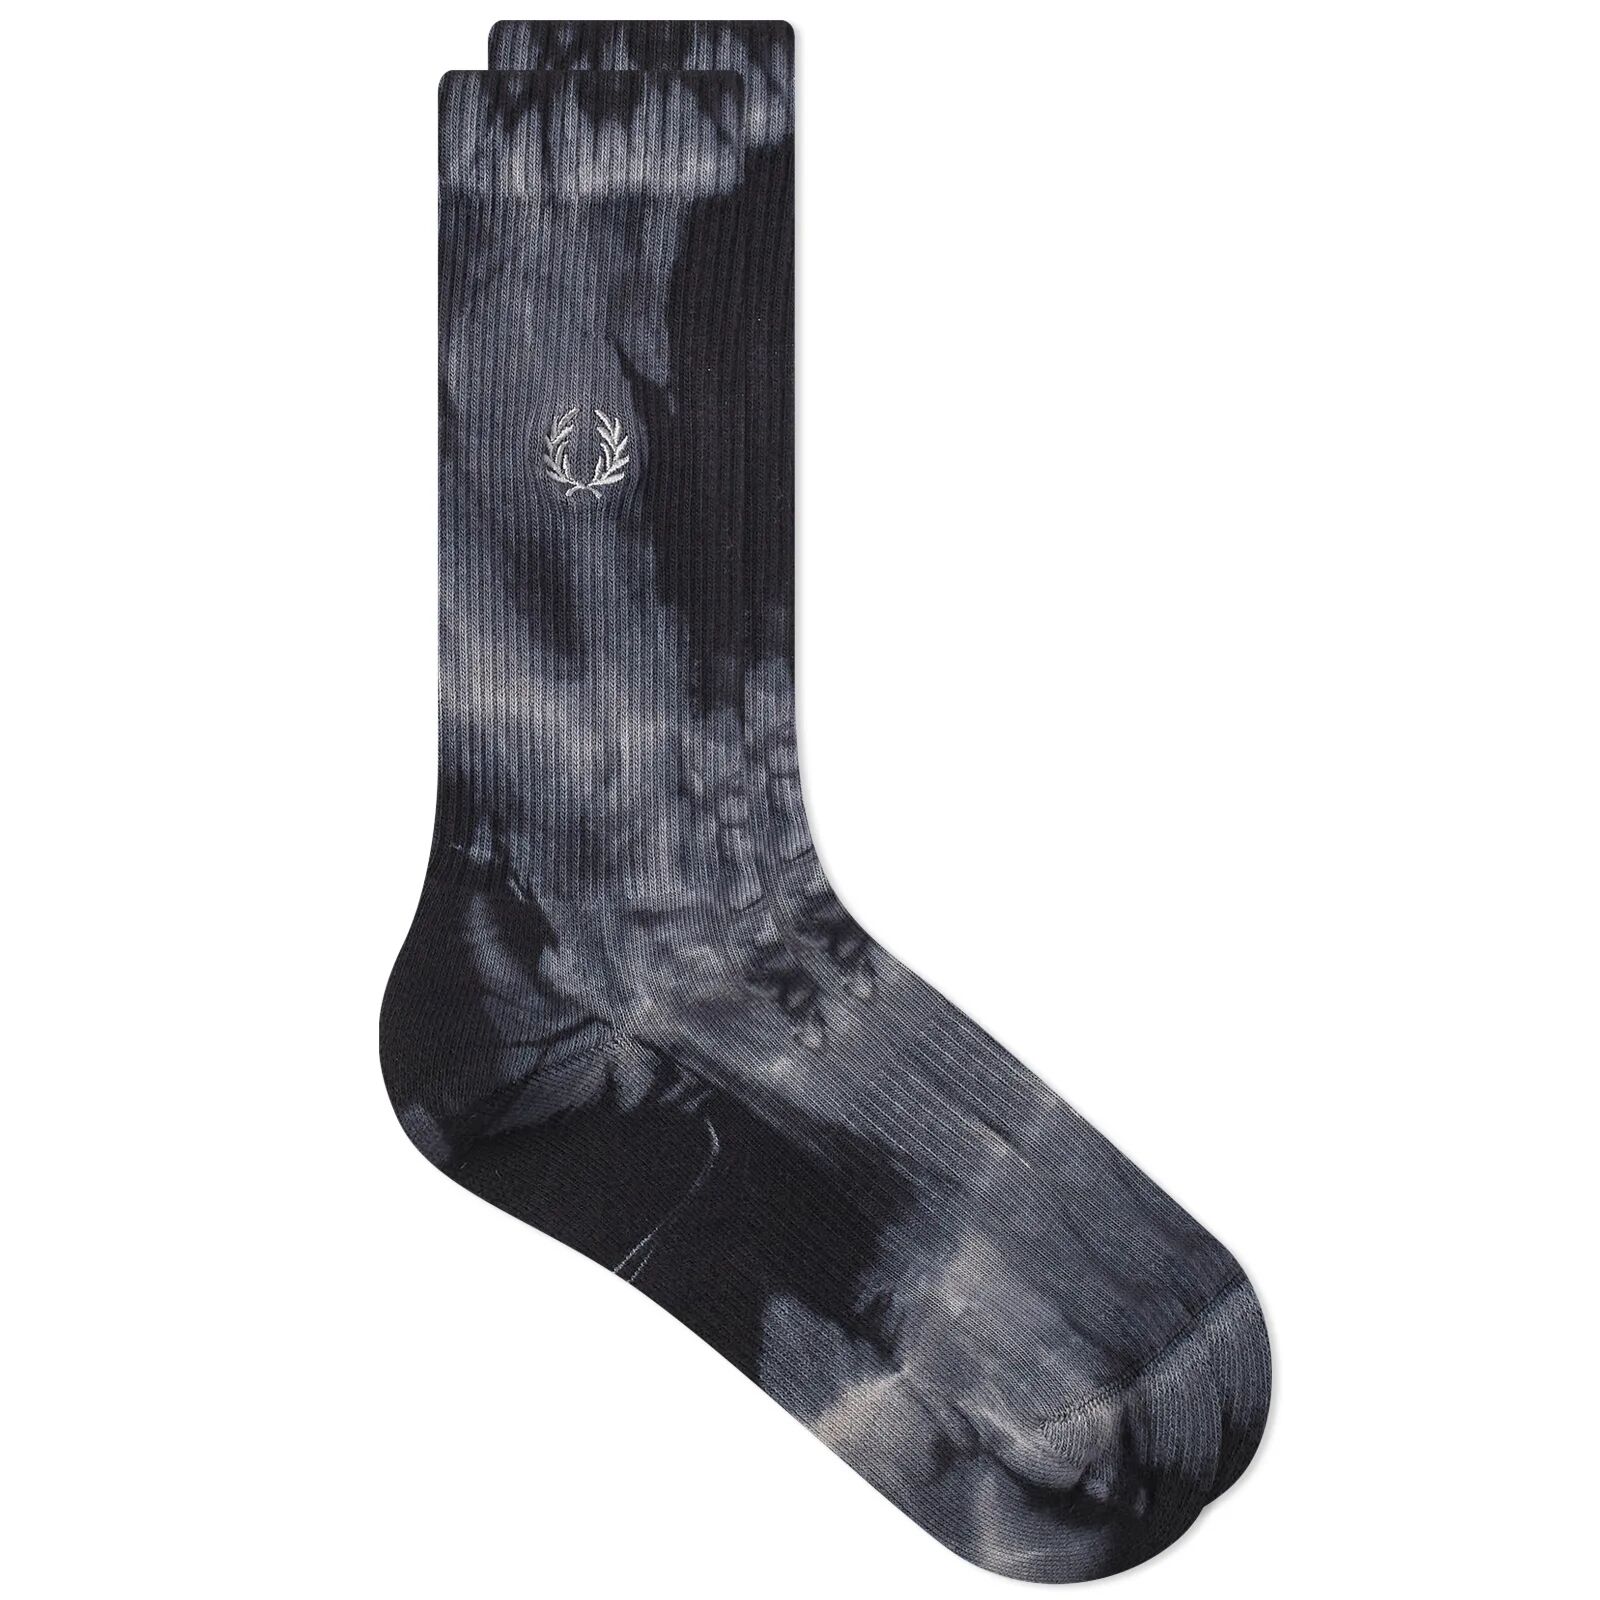 Fred Perry Men's Tie Dye Graphic Sock in Black, Size Large